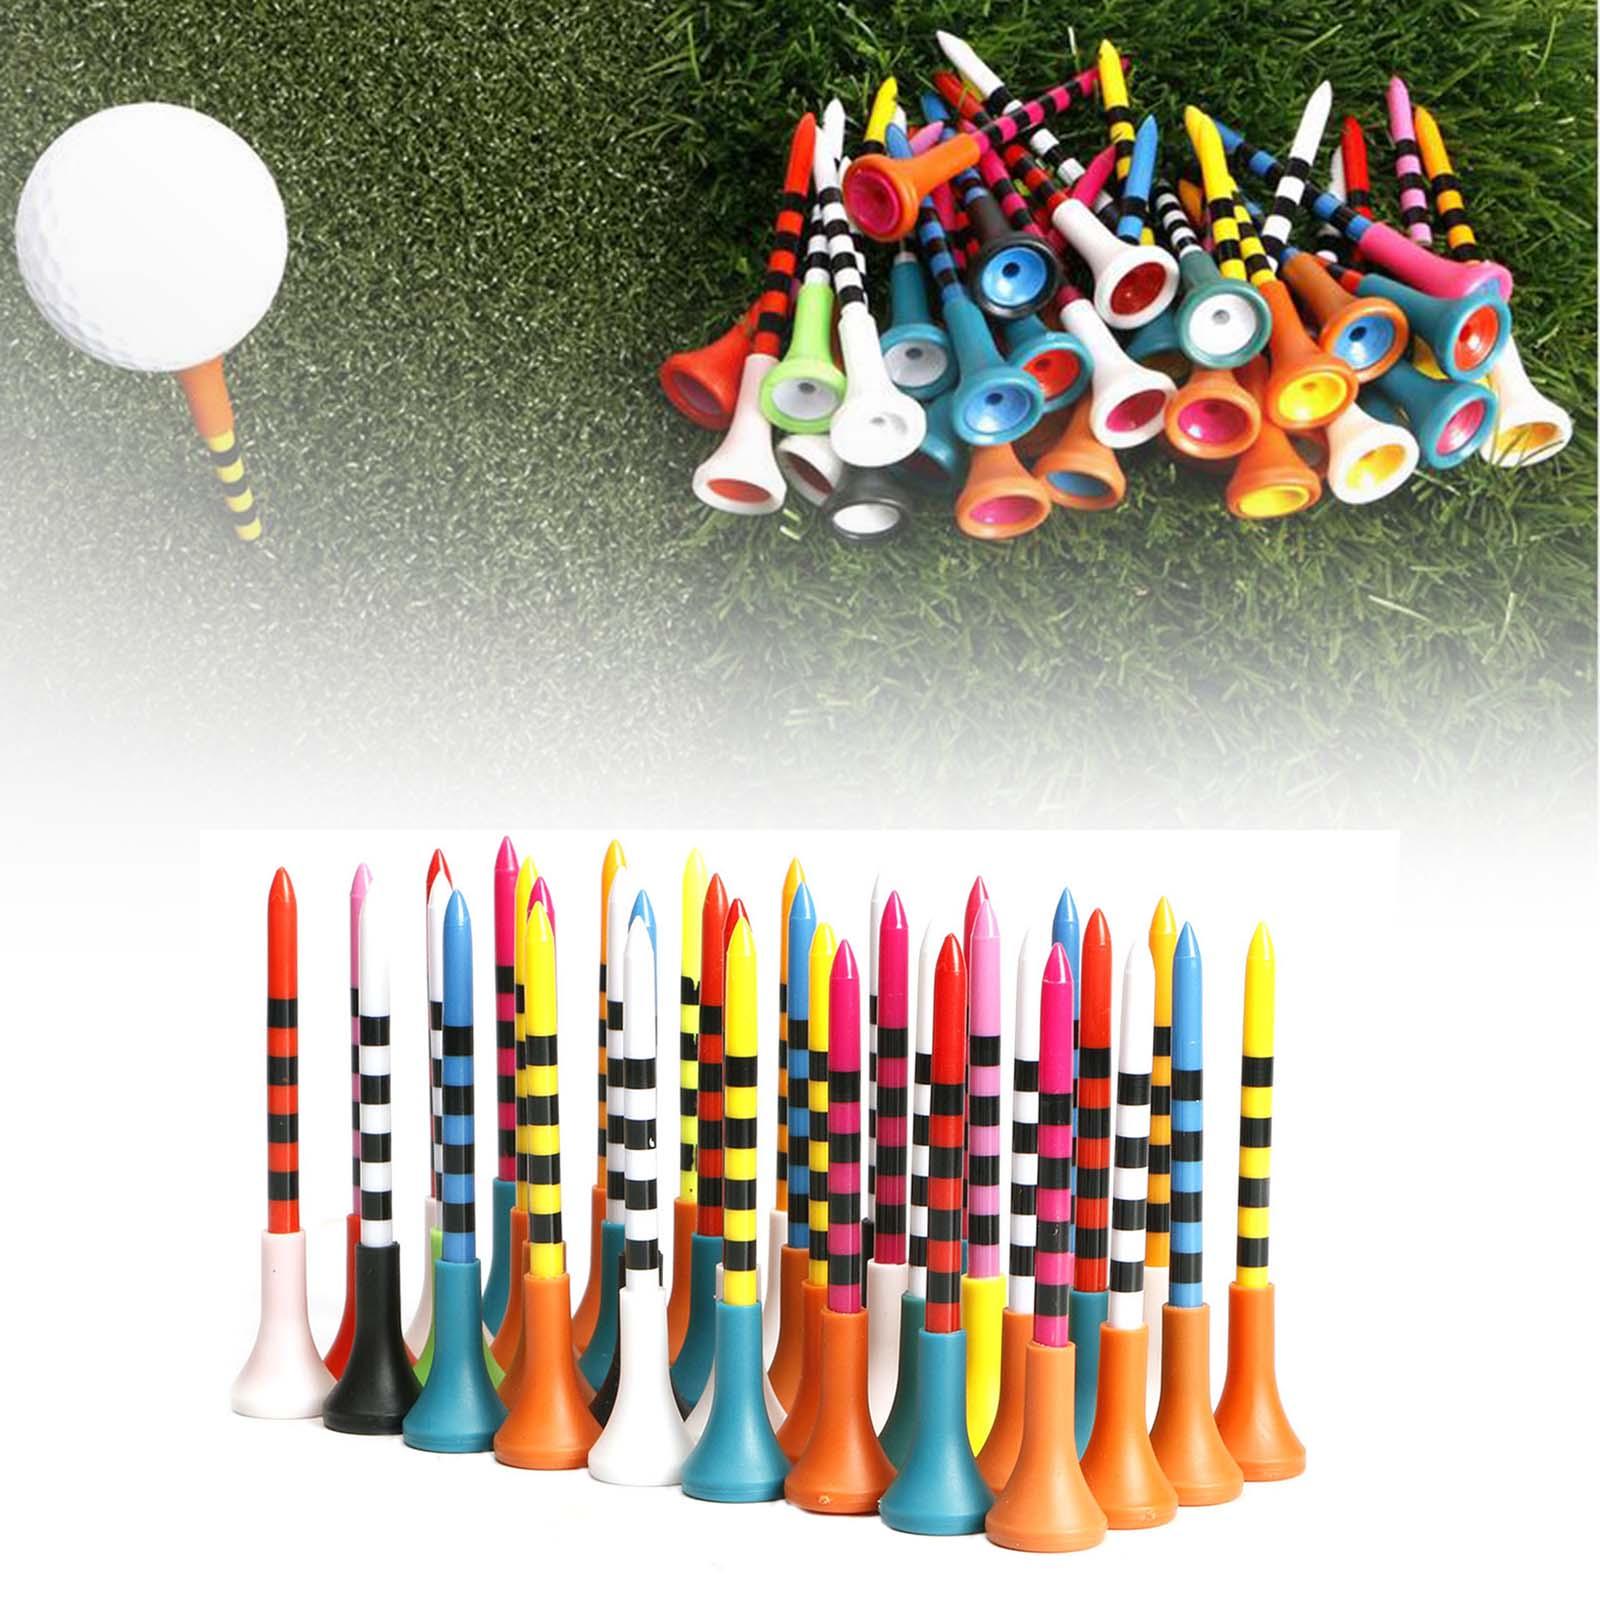 Rubber Golf Tees Unbreakable Portable Durable Stable for Sports Accessories 7cmx1.7cm